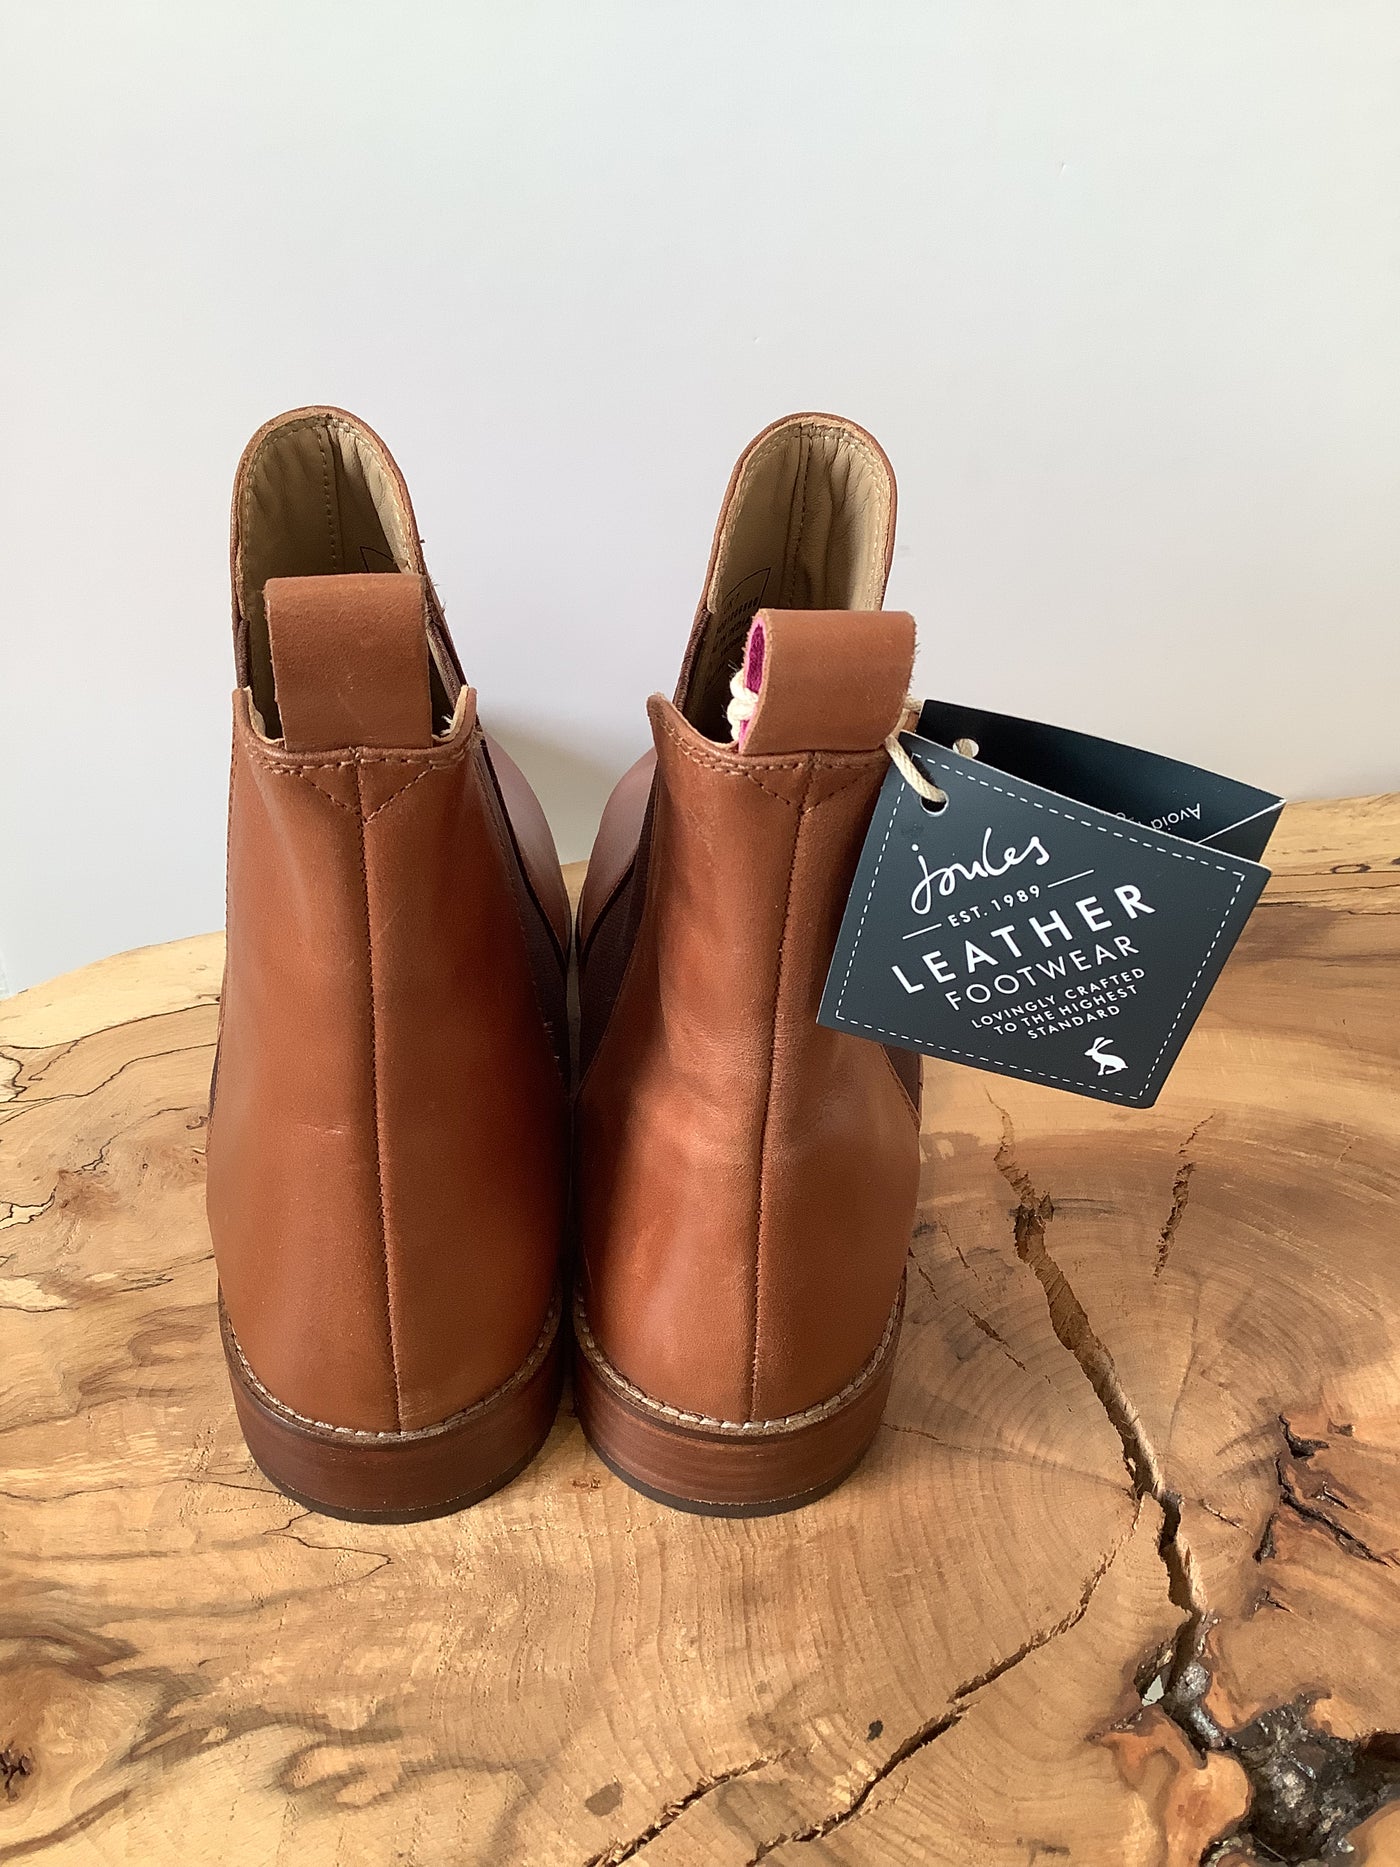 Joules Tan Chelsea Boots 7 New RRP £140